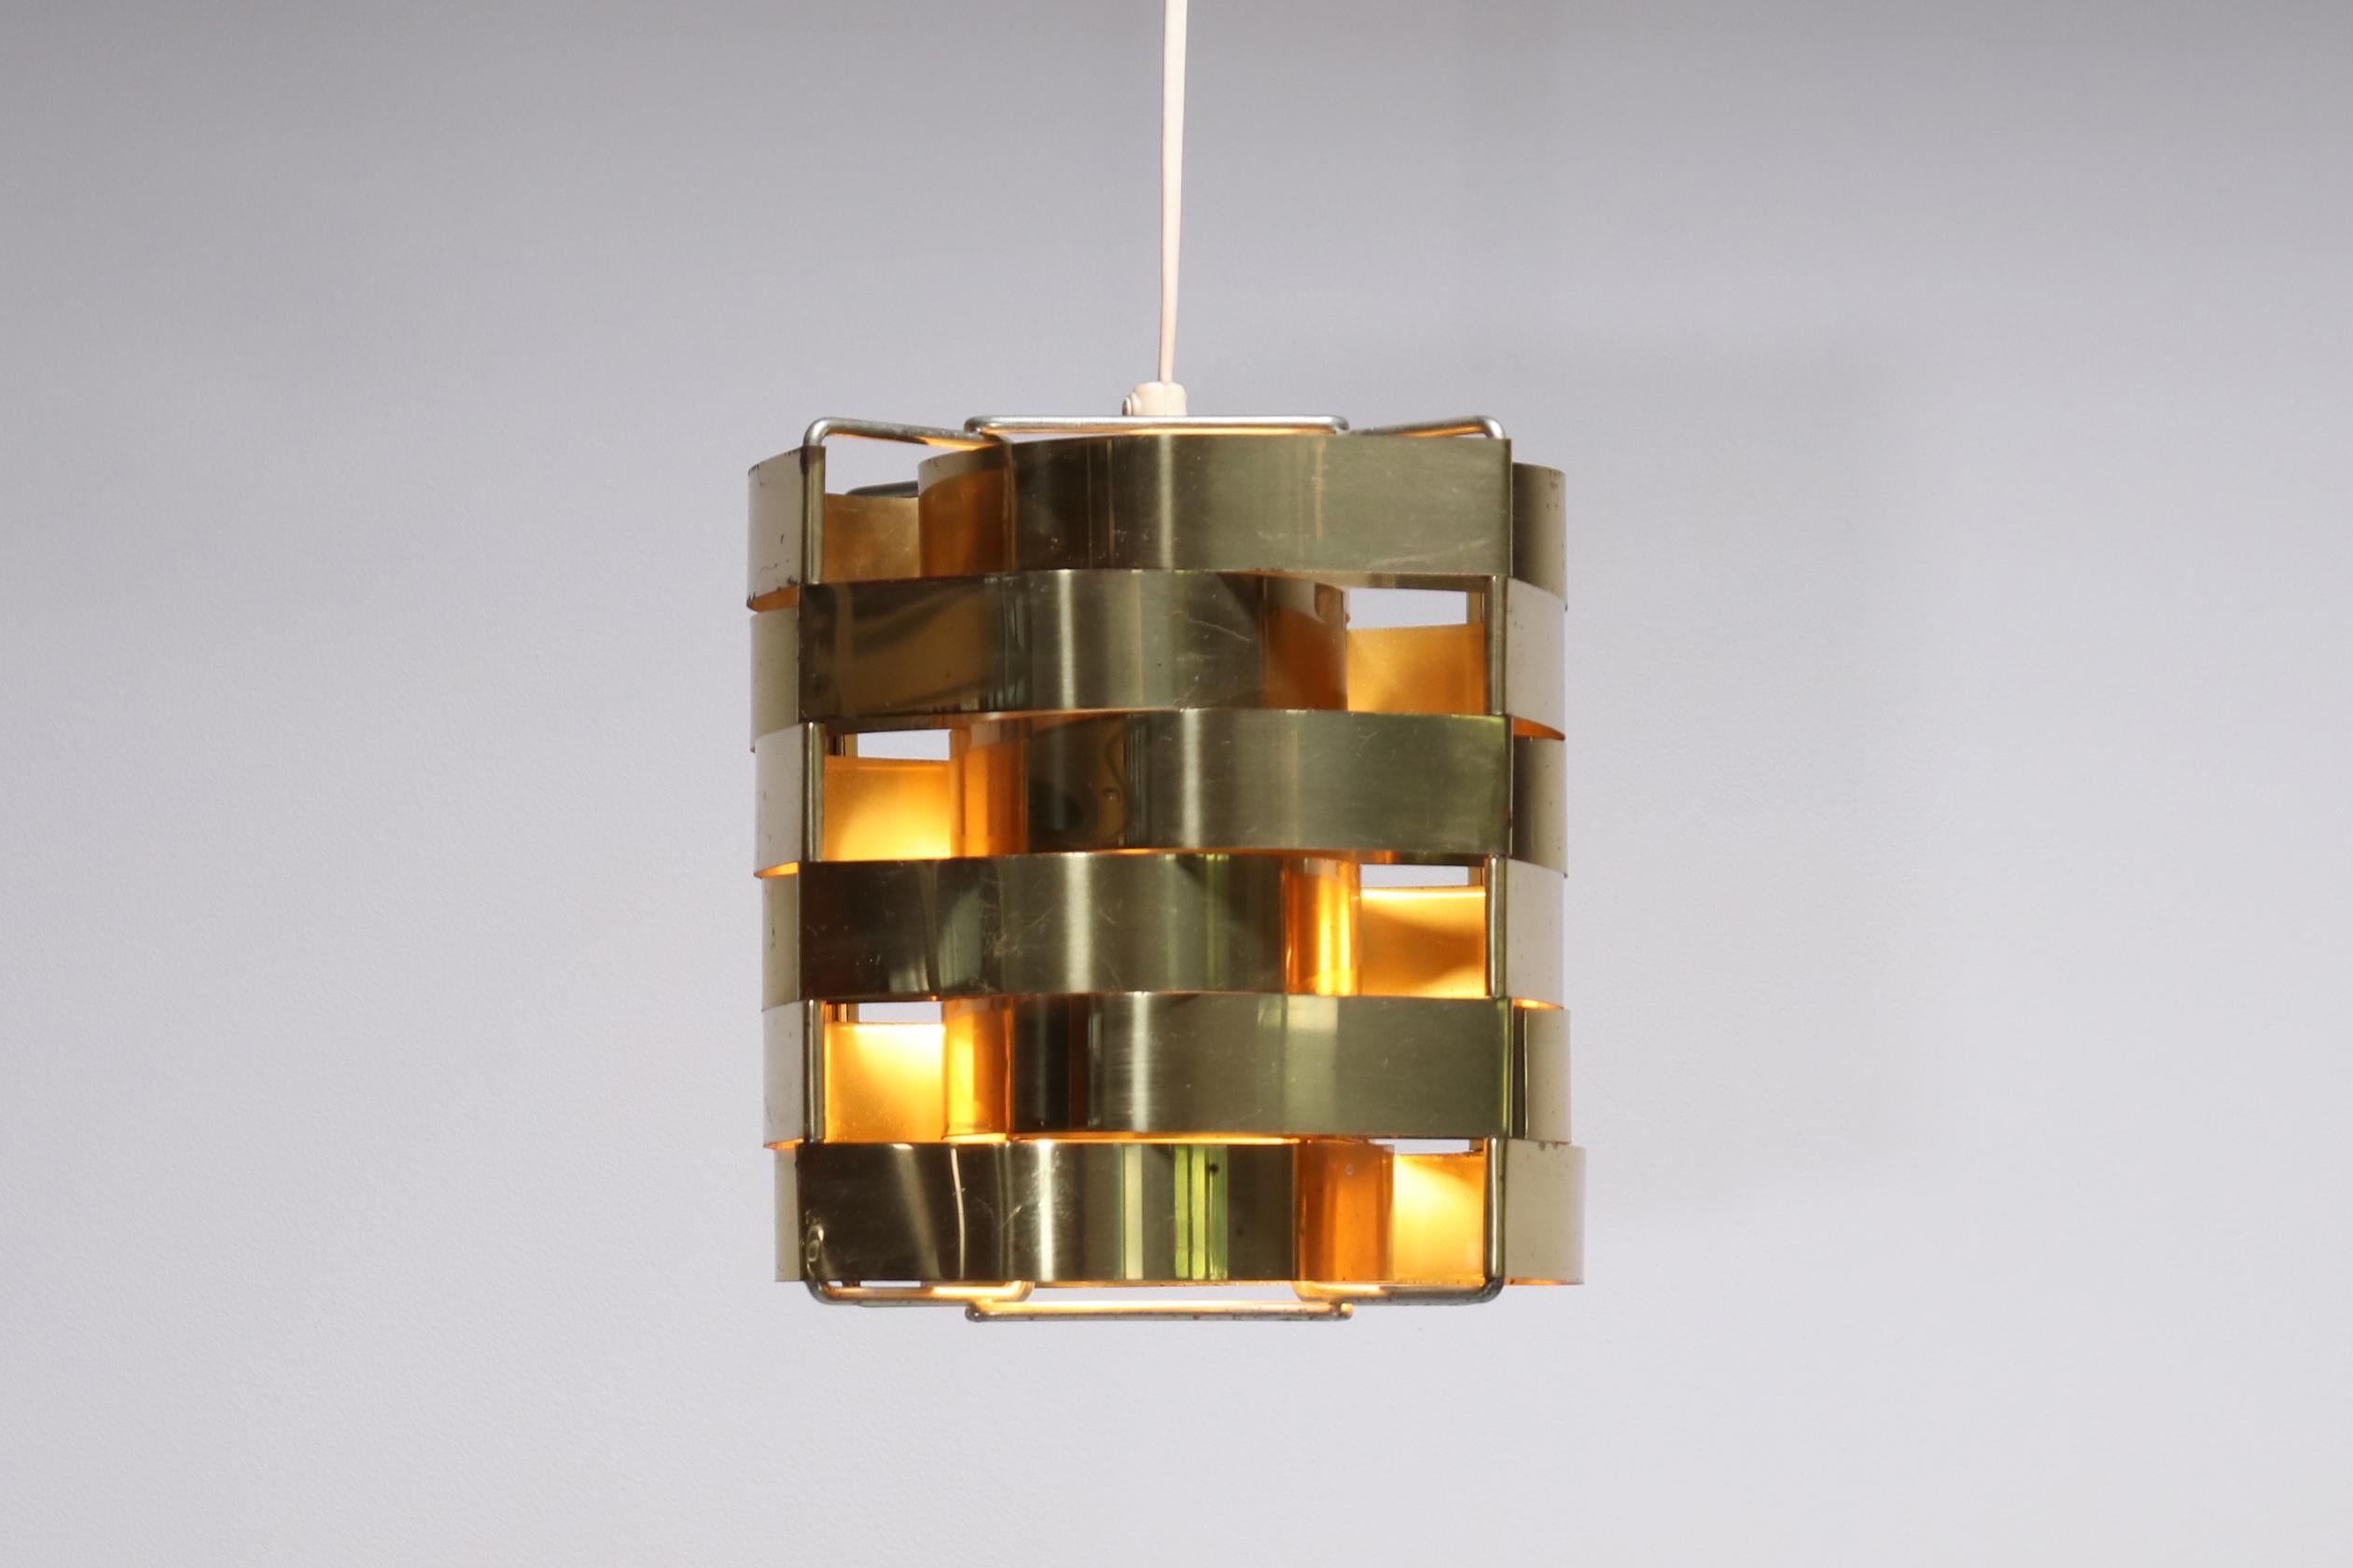 Special and uncommon brass hanging lamp. The brass lamp was made by the French designer Max Sauze for the Max Sauze Studio in the 1970s.
This pendant lamp, called Mars, contains curved brass strips that together create a cube shape.
We were told